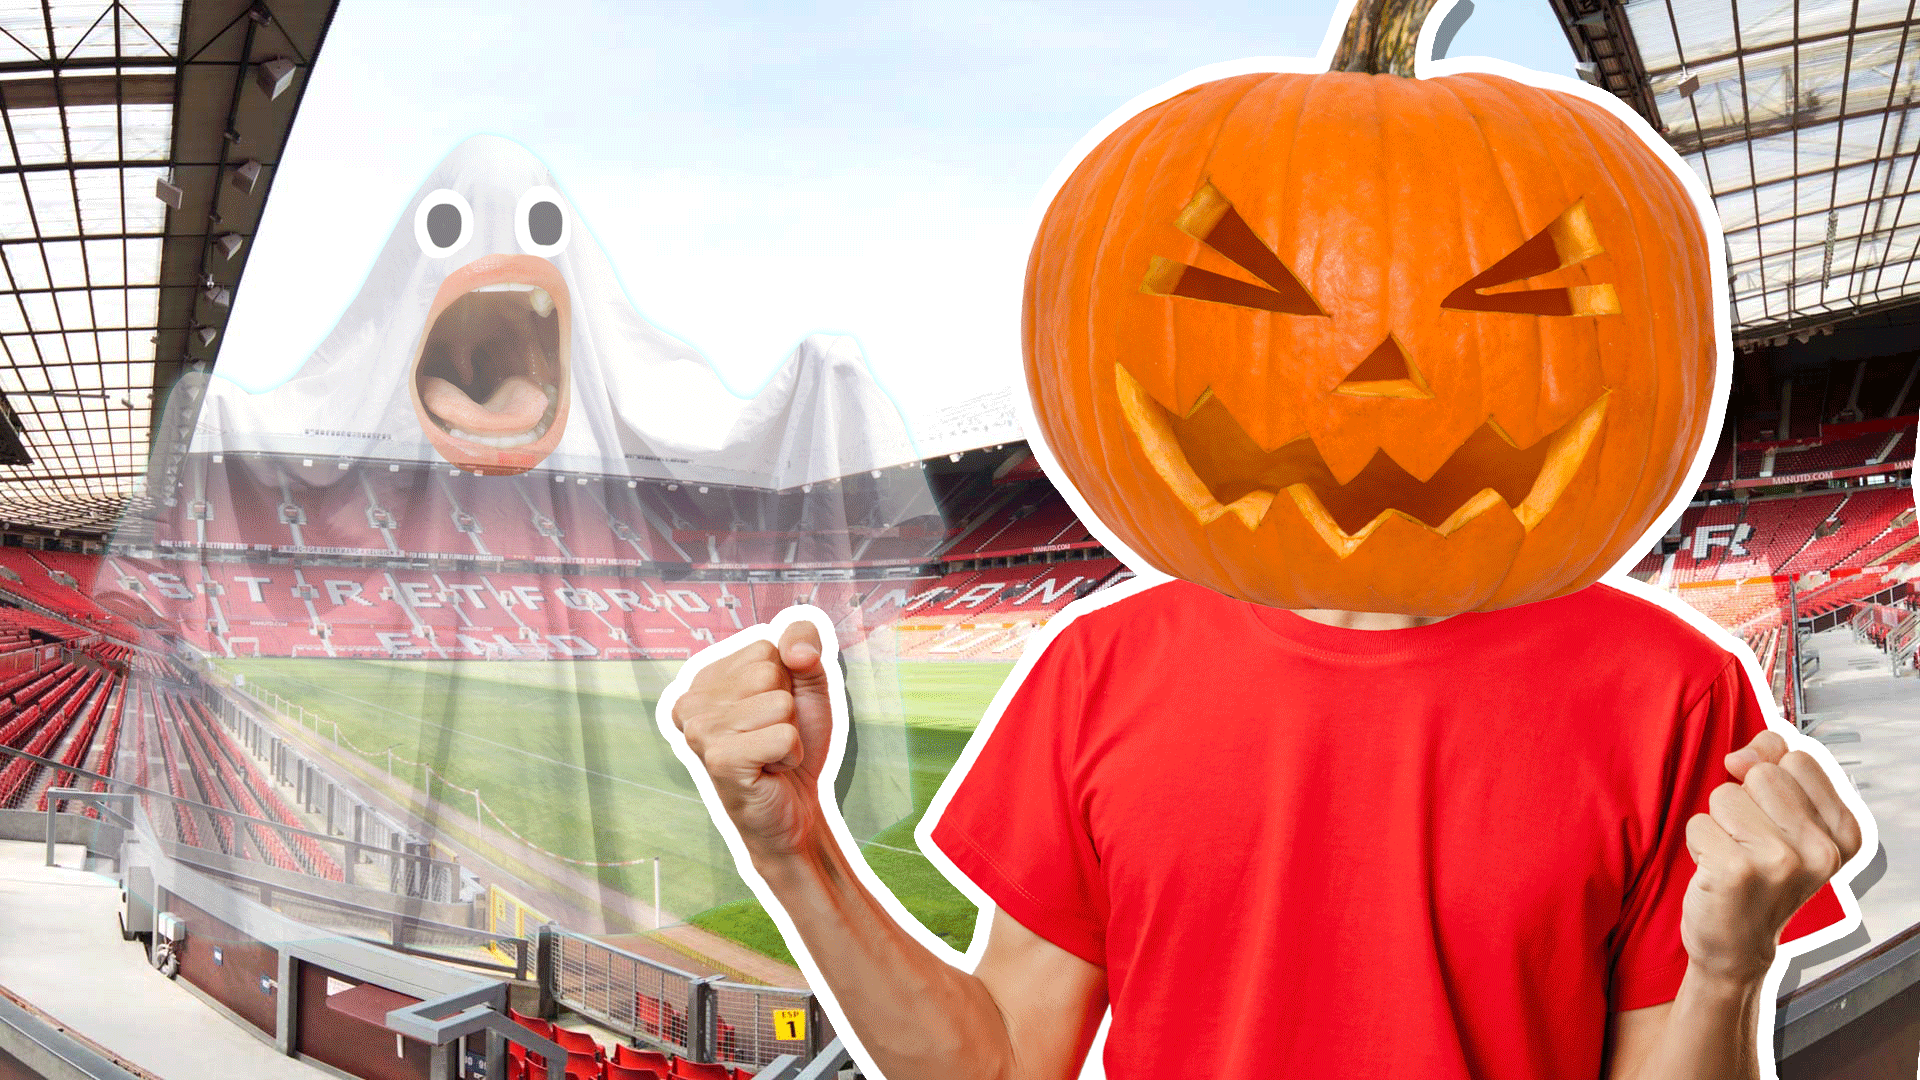 A pumpkin and ghost at Manchester United's ground